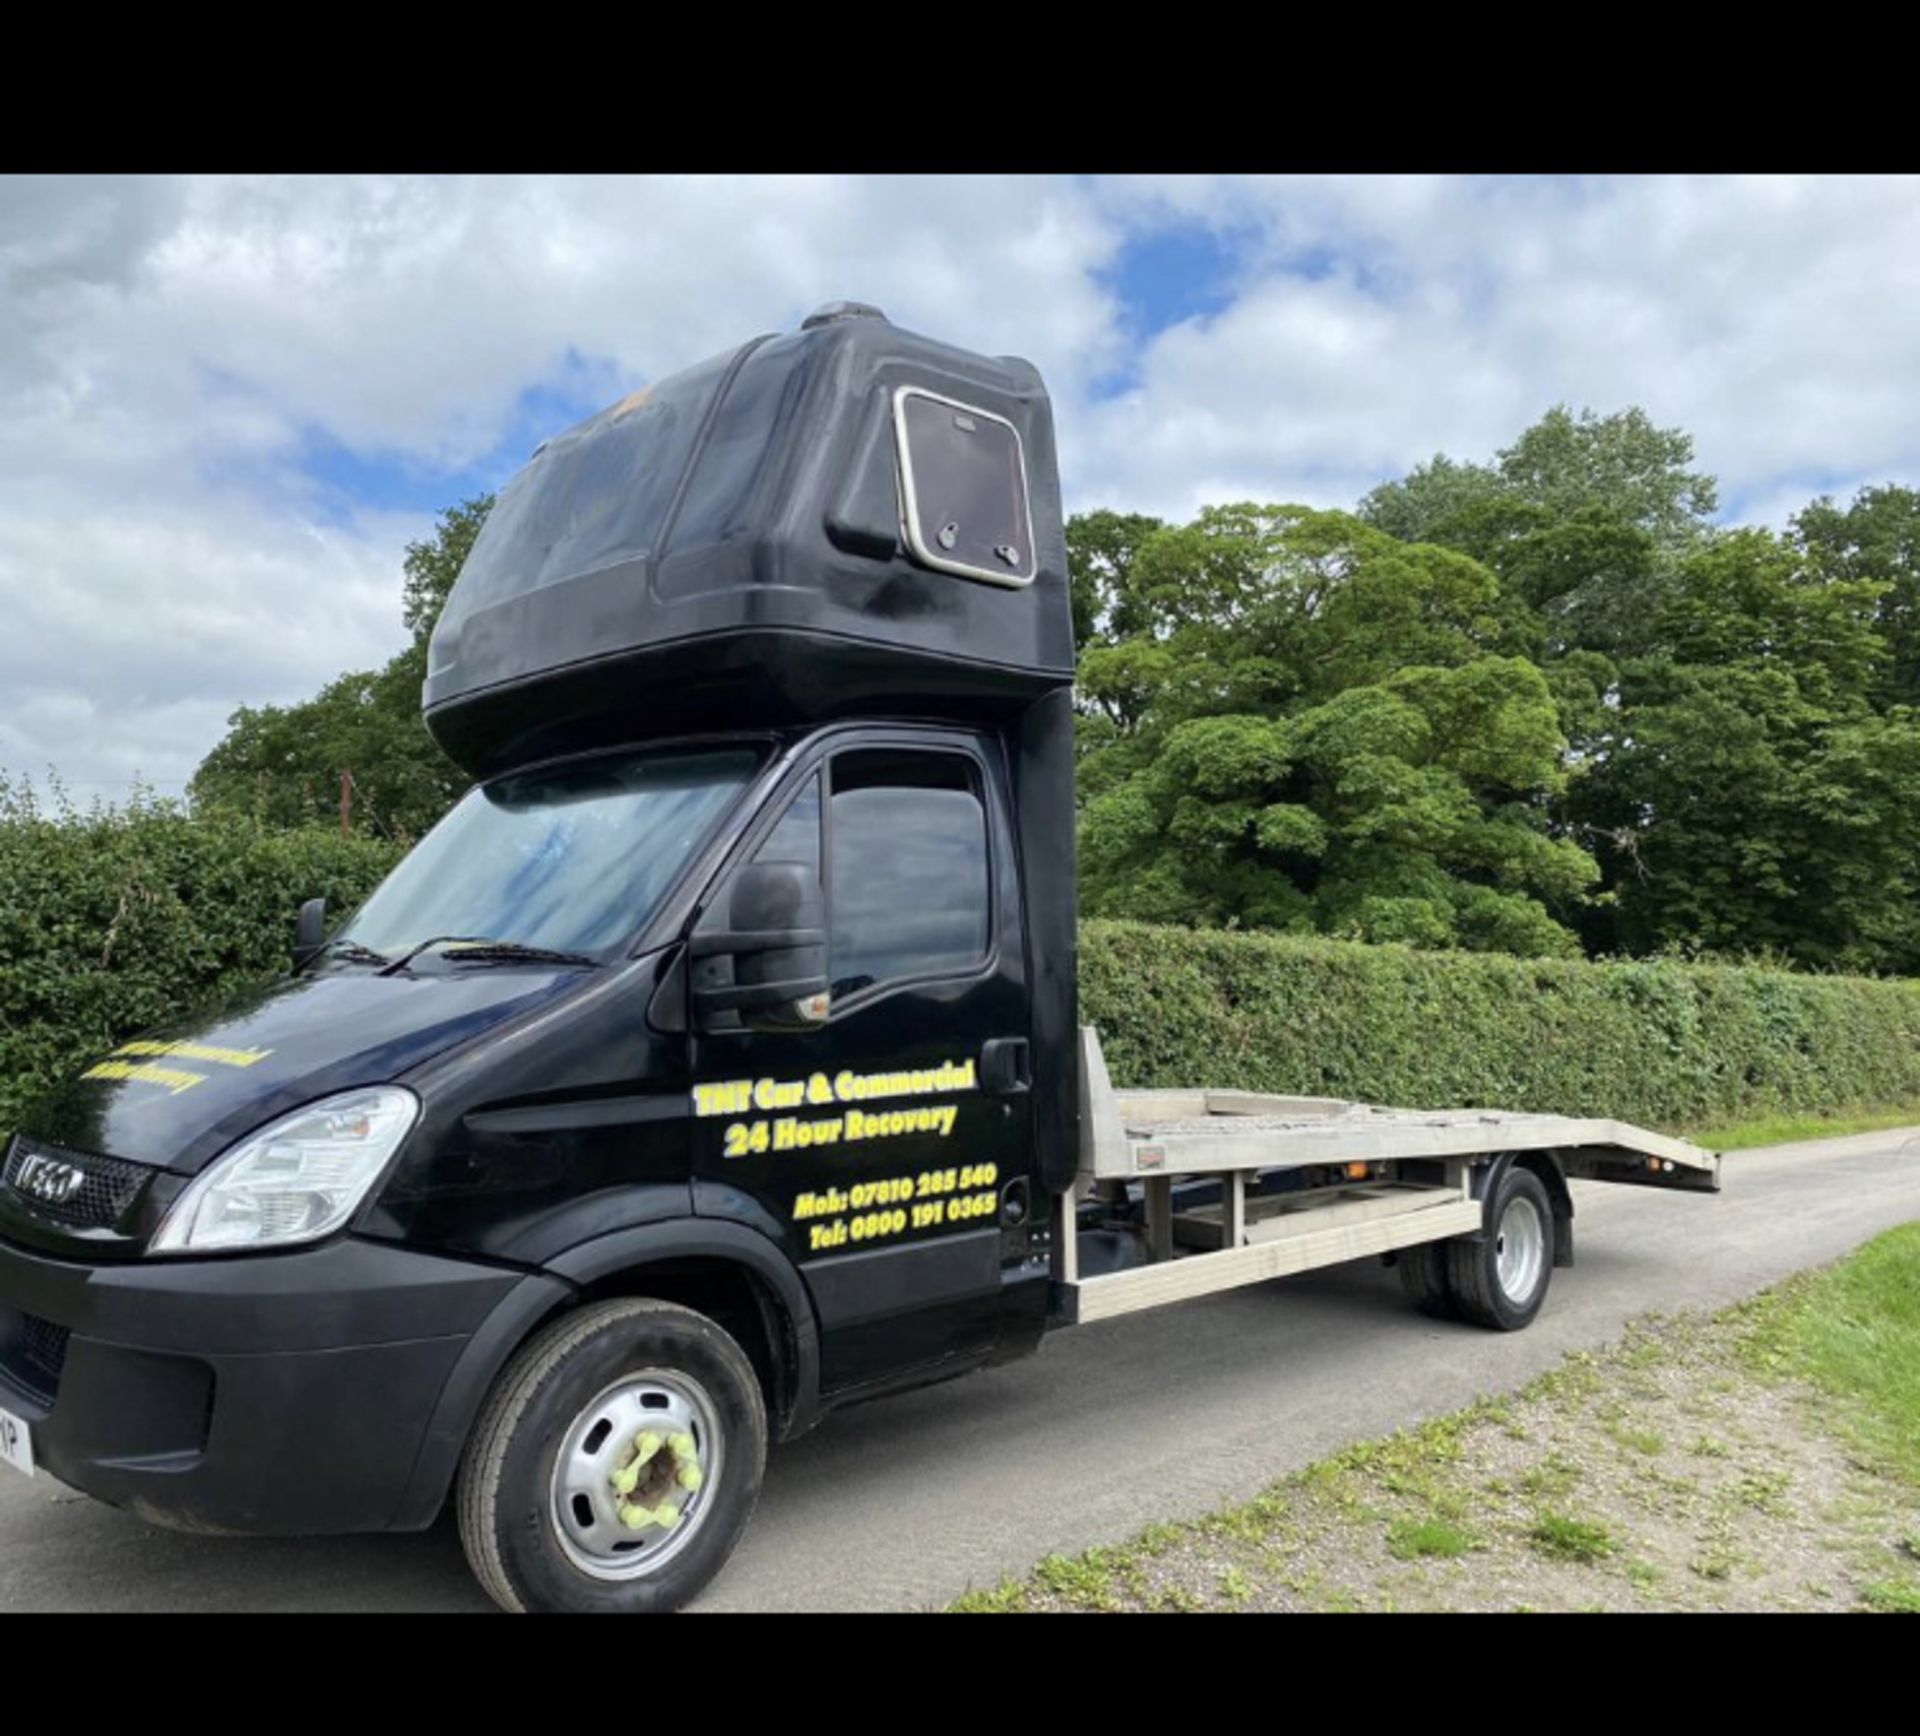 IVECO DAILY 50C15 5.2 TON RECOVERY TRUCK YEAR 2011 LOCATION: NORTH YORKSHIRE - Image 11 of 15